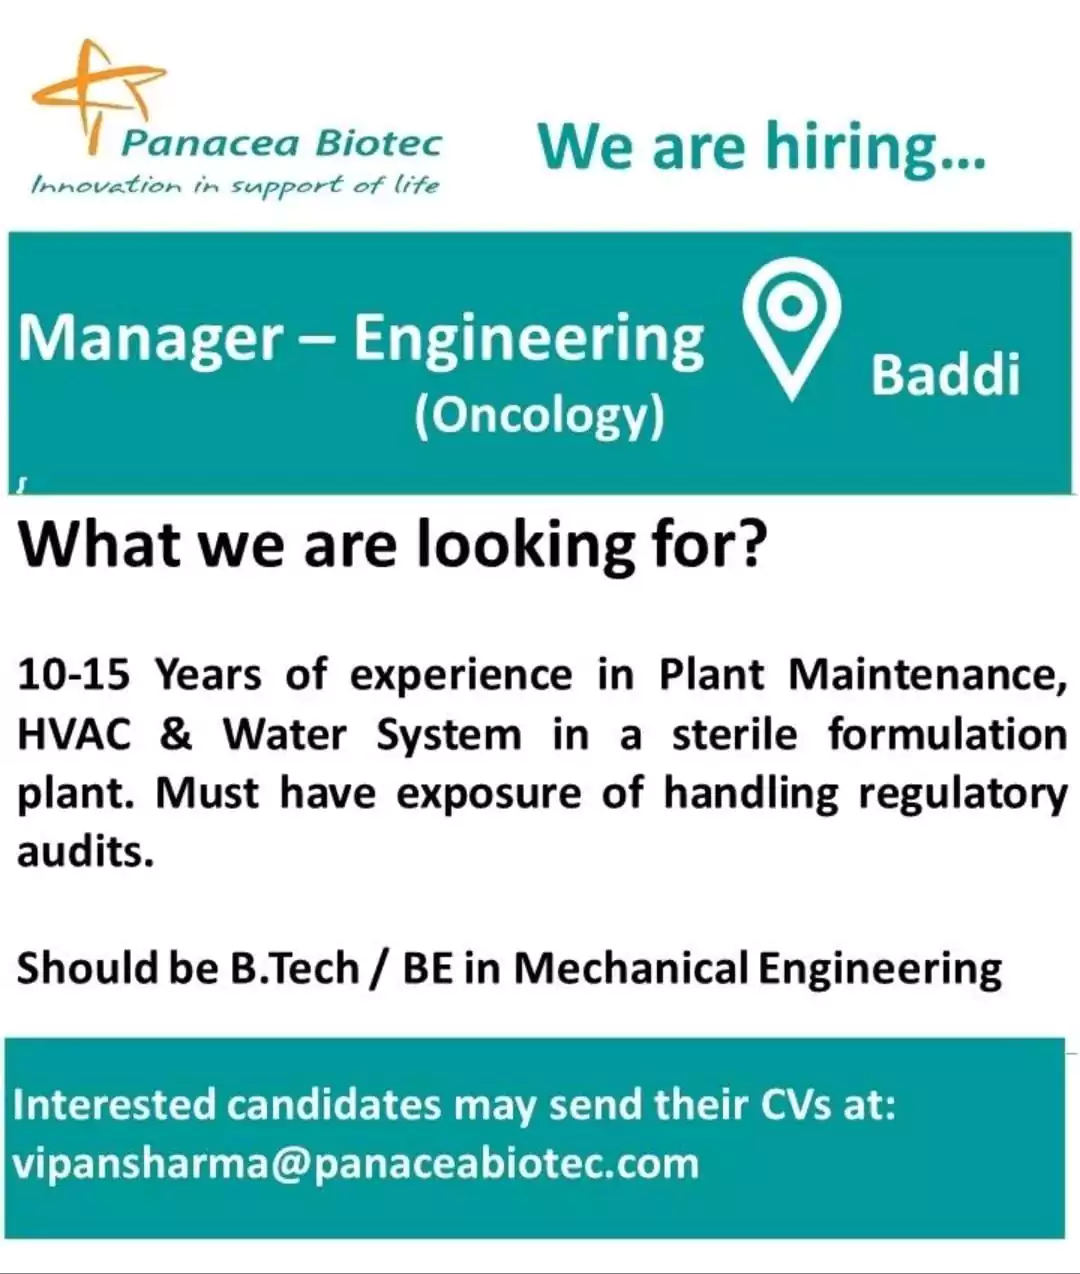 Panacea Biotec Hiring for Engineering (Oncology) Department; Manager position